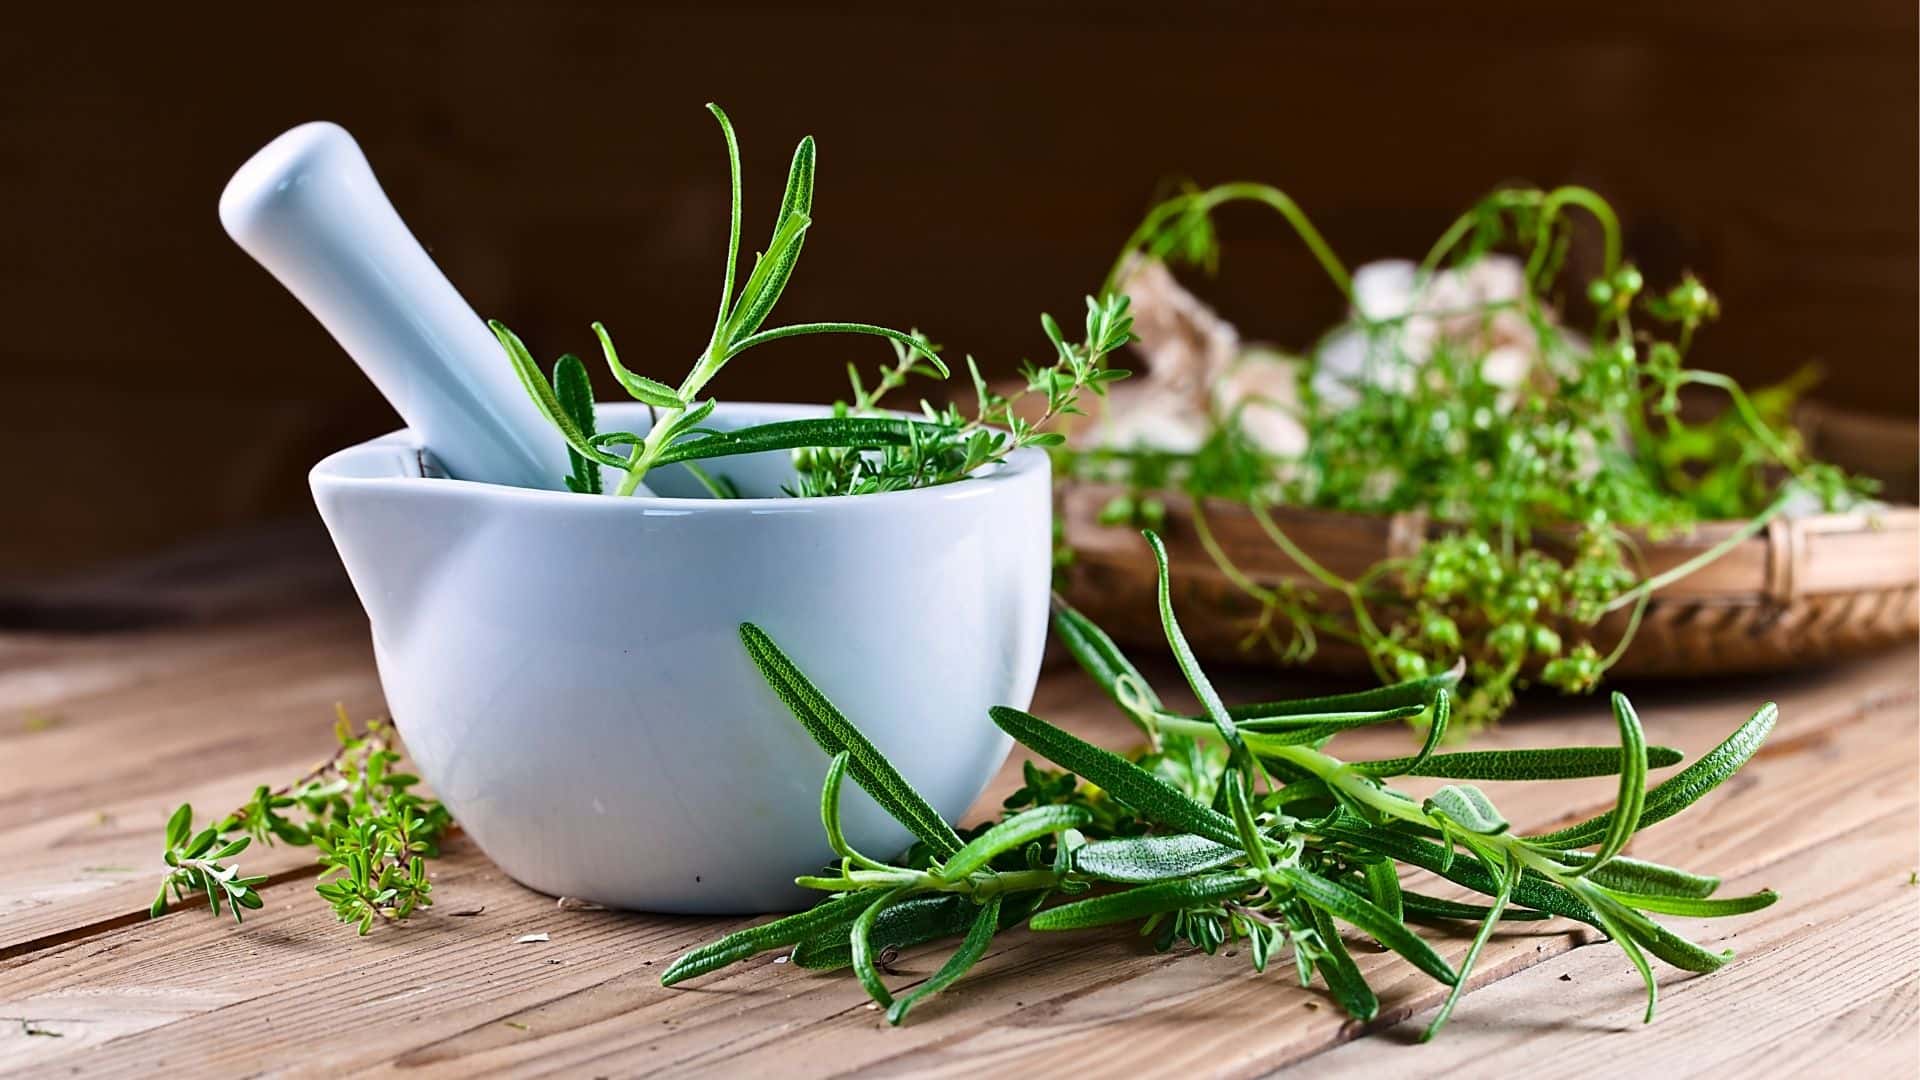 Top 15 Herbs to Grow Indoors for Cooking and Medicinal Uses